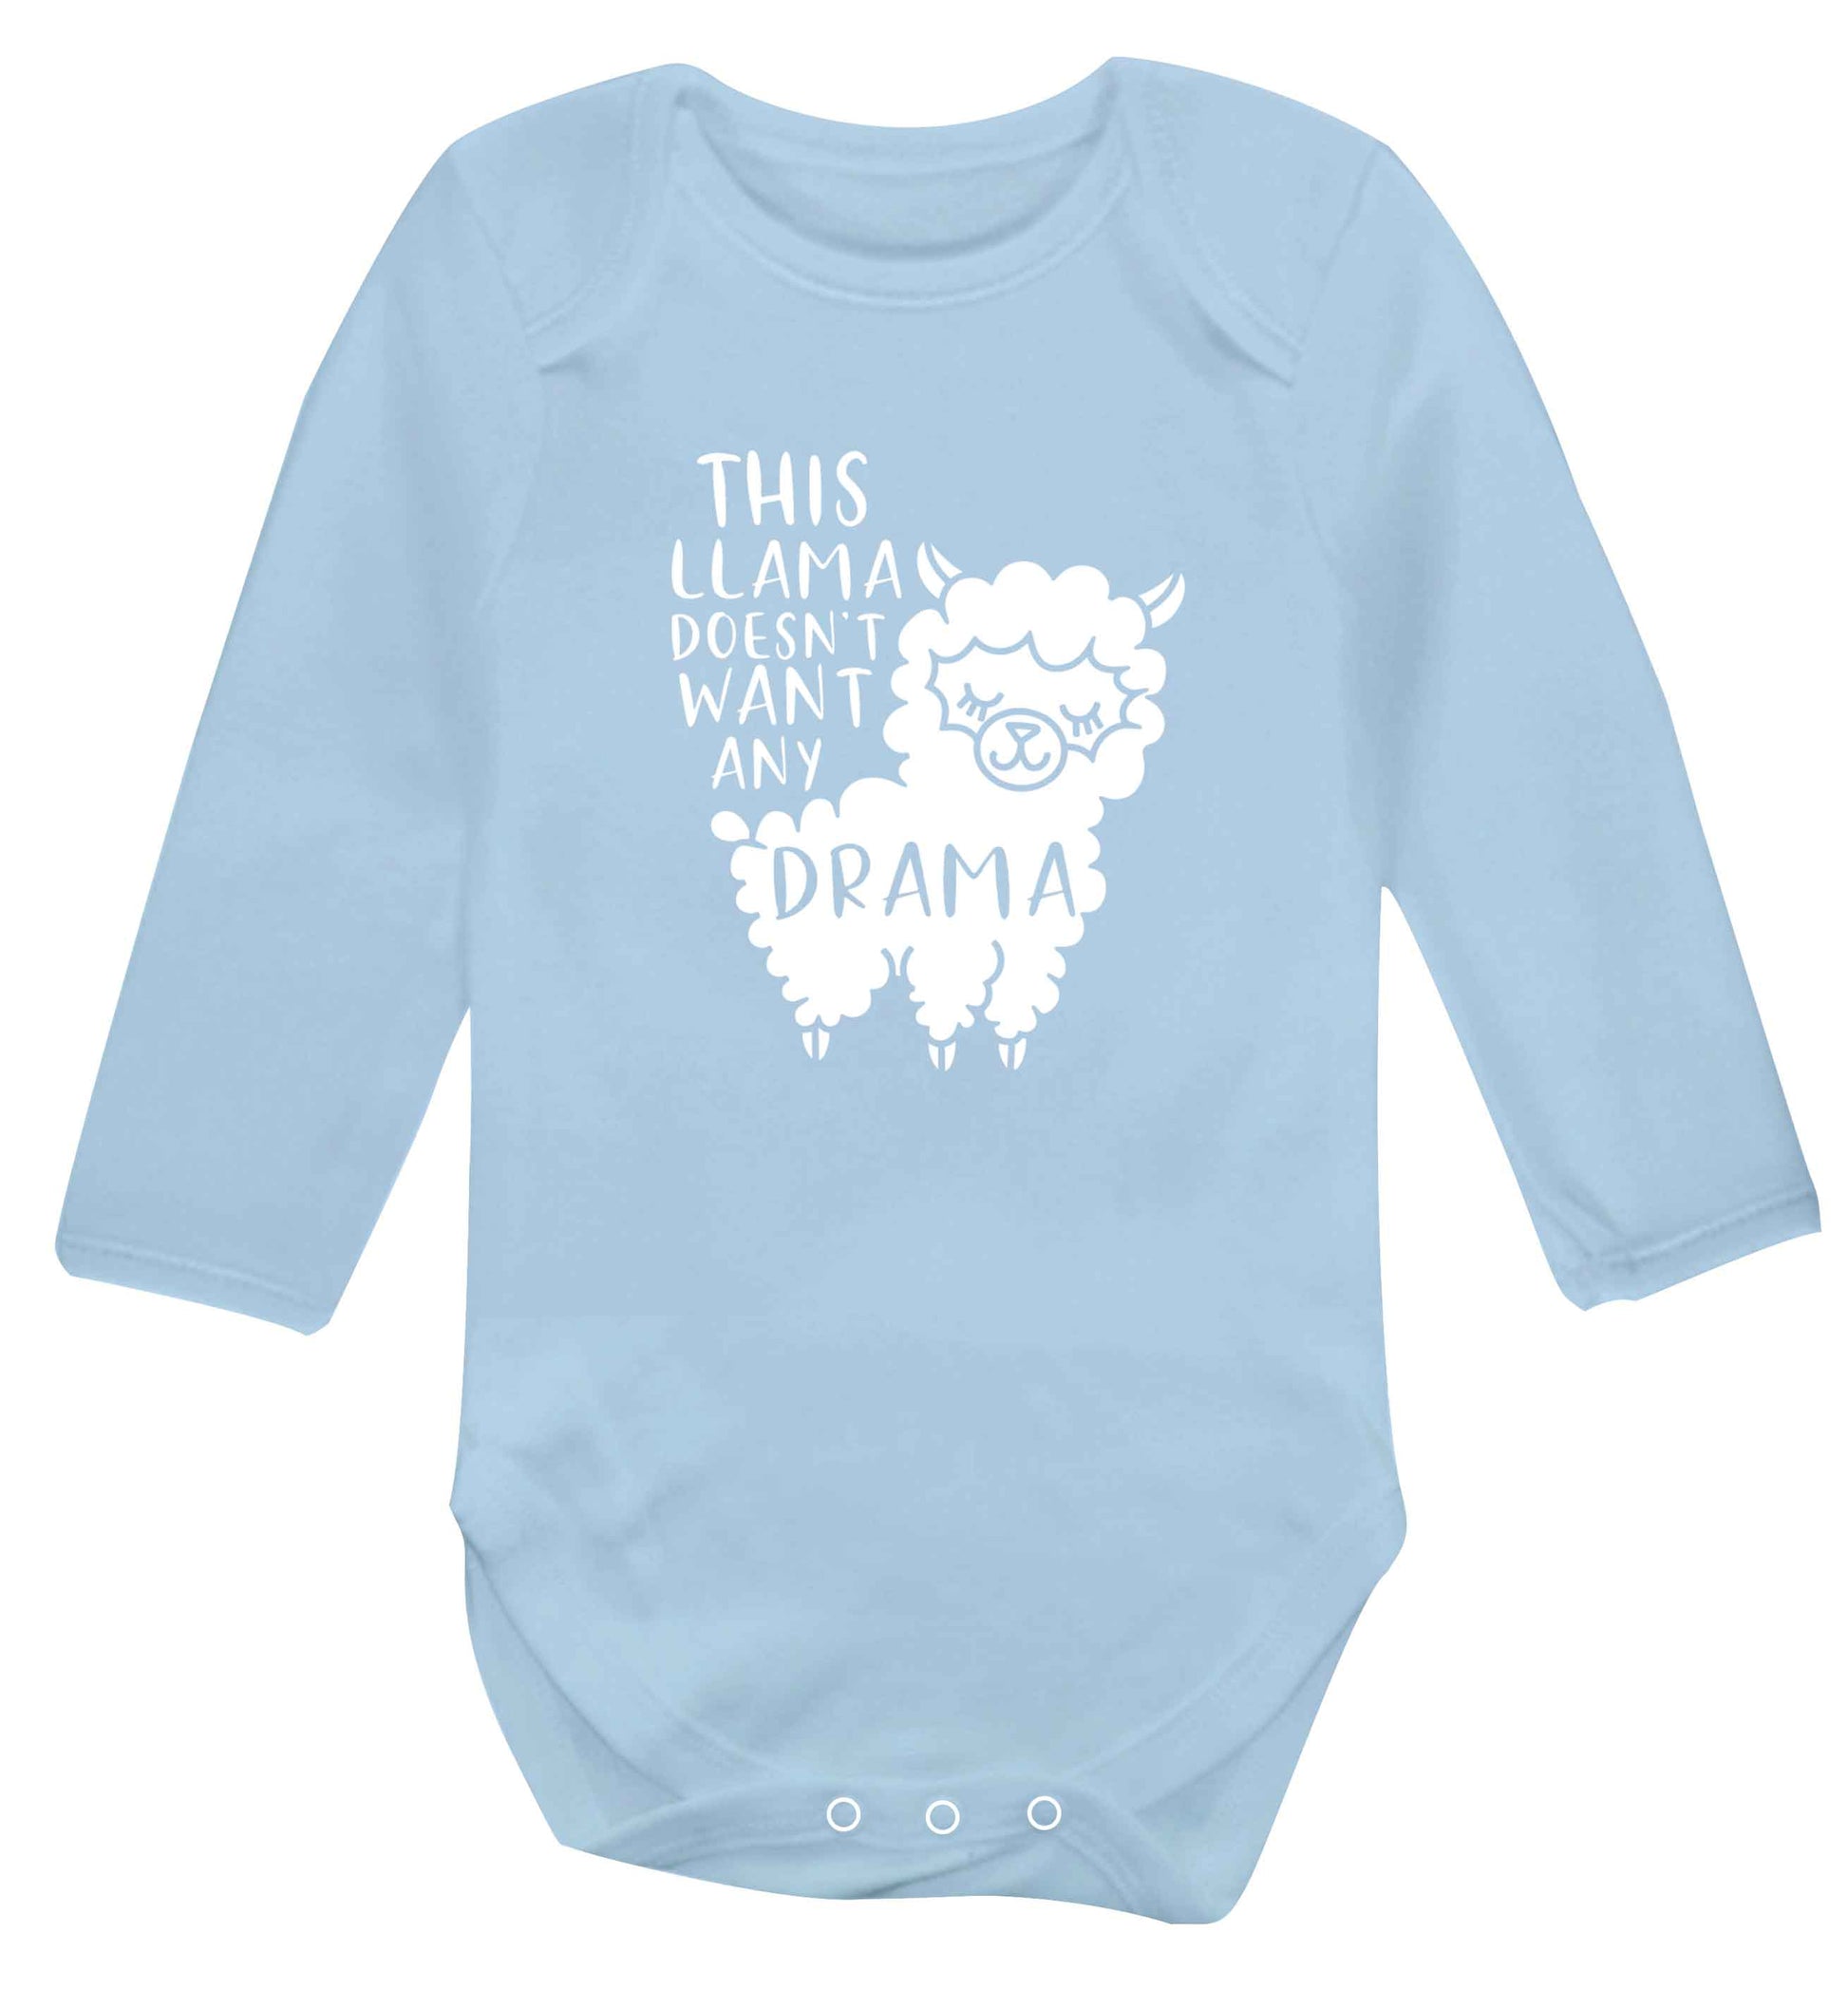 This Llama doesn't want any drama baby vest long sleeved pale blue 6-12 months